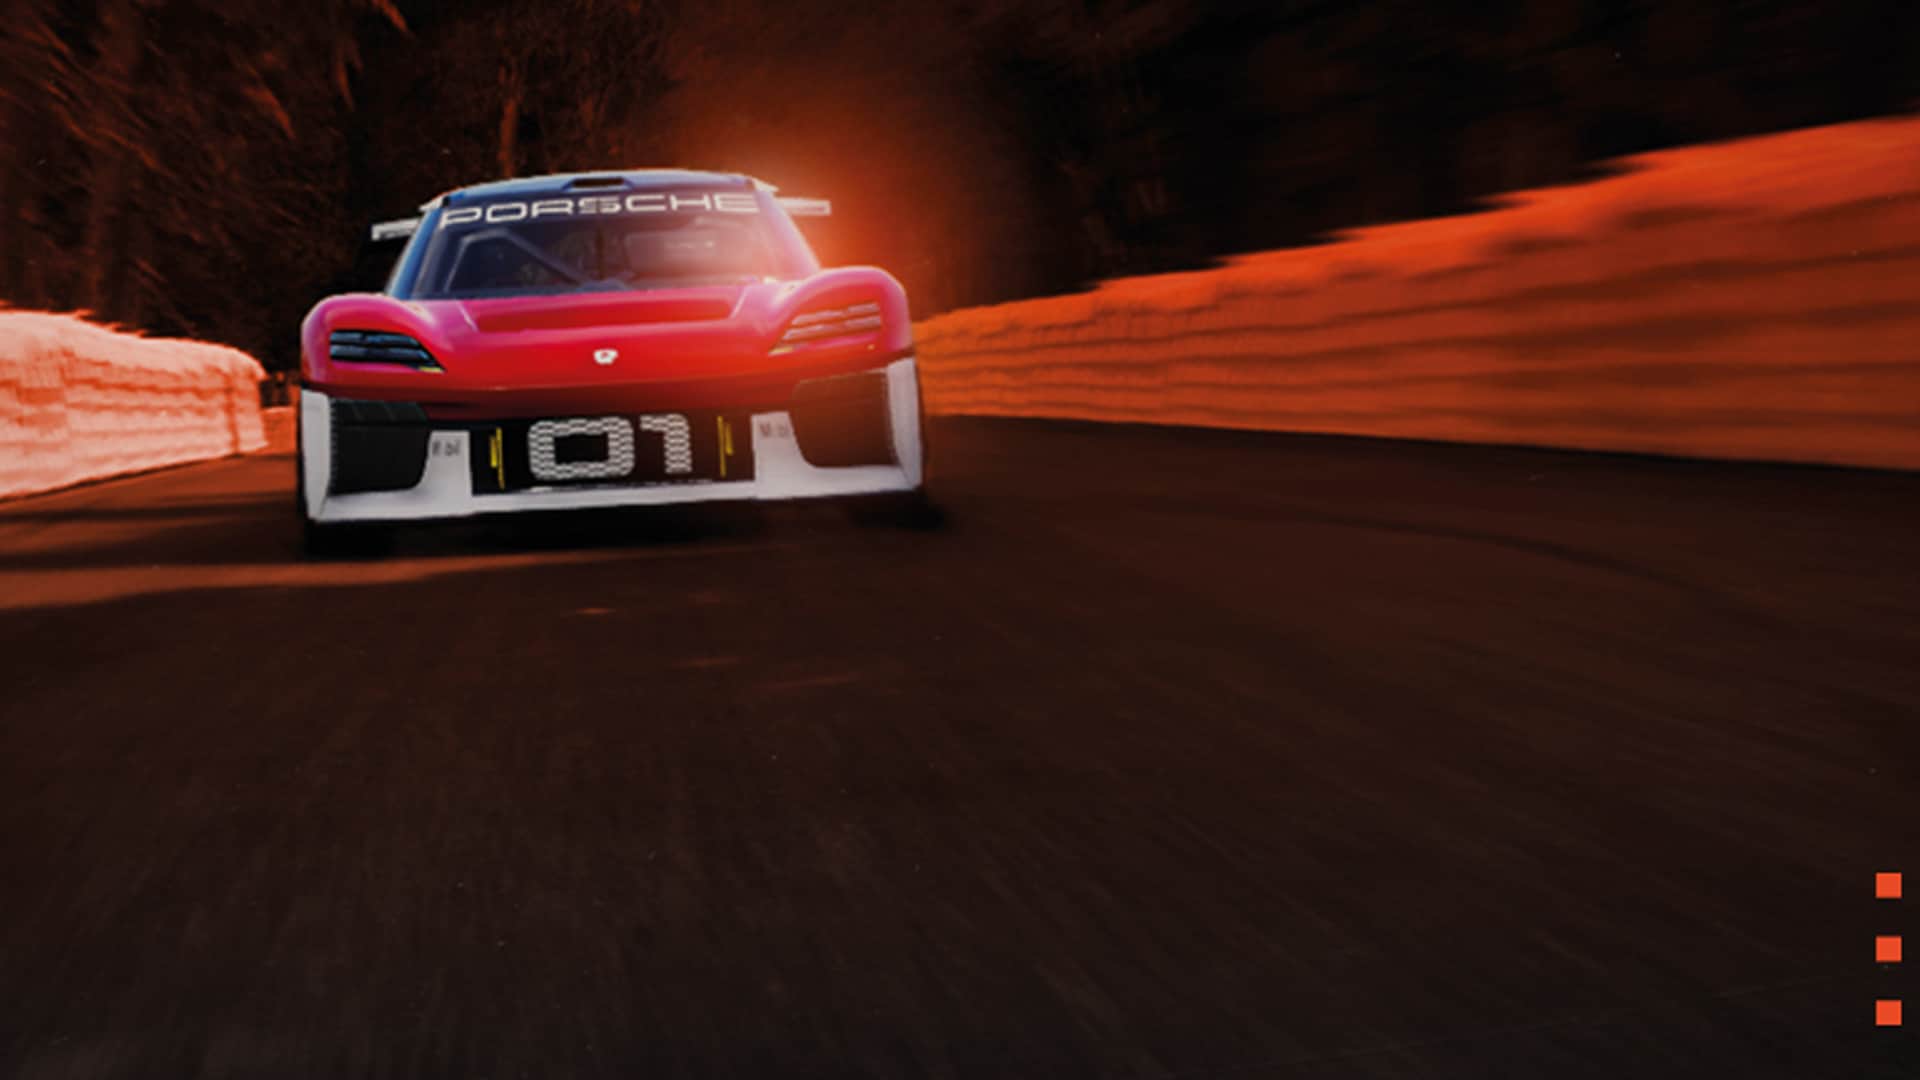 Gran Turismo 7, Honest One Month Review on